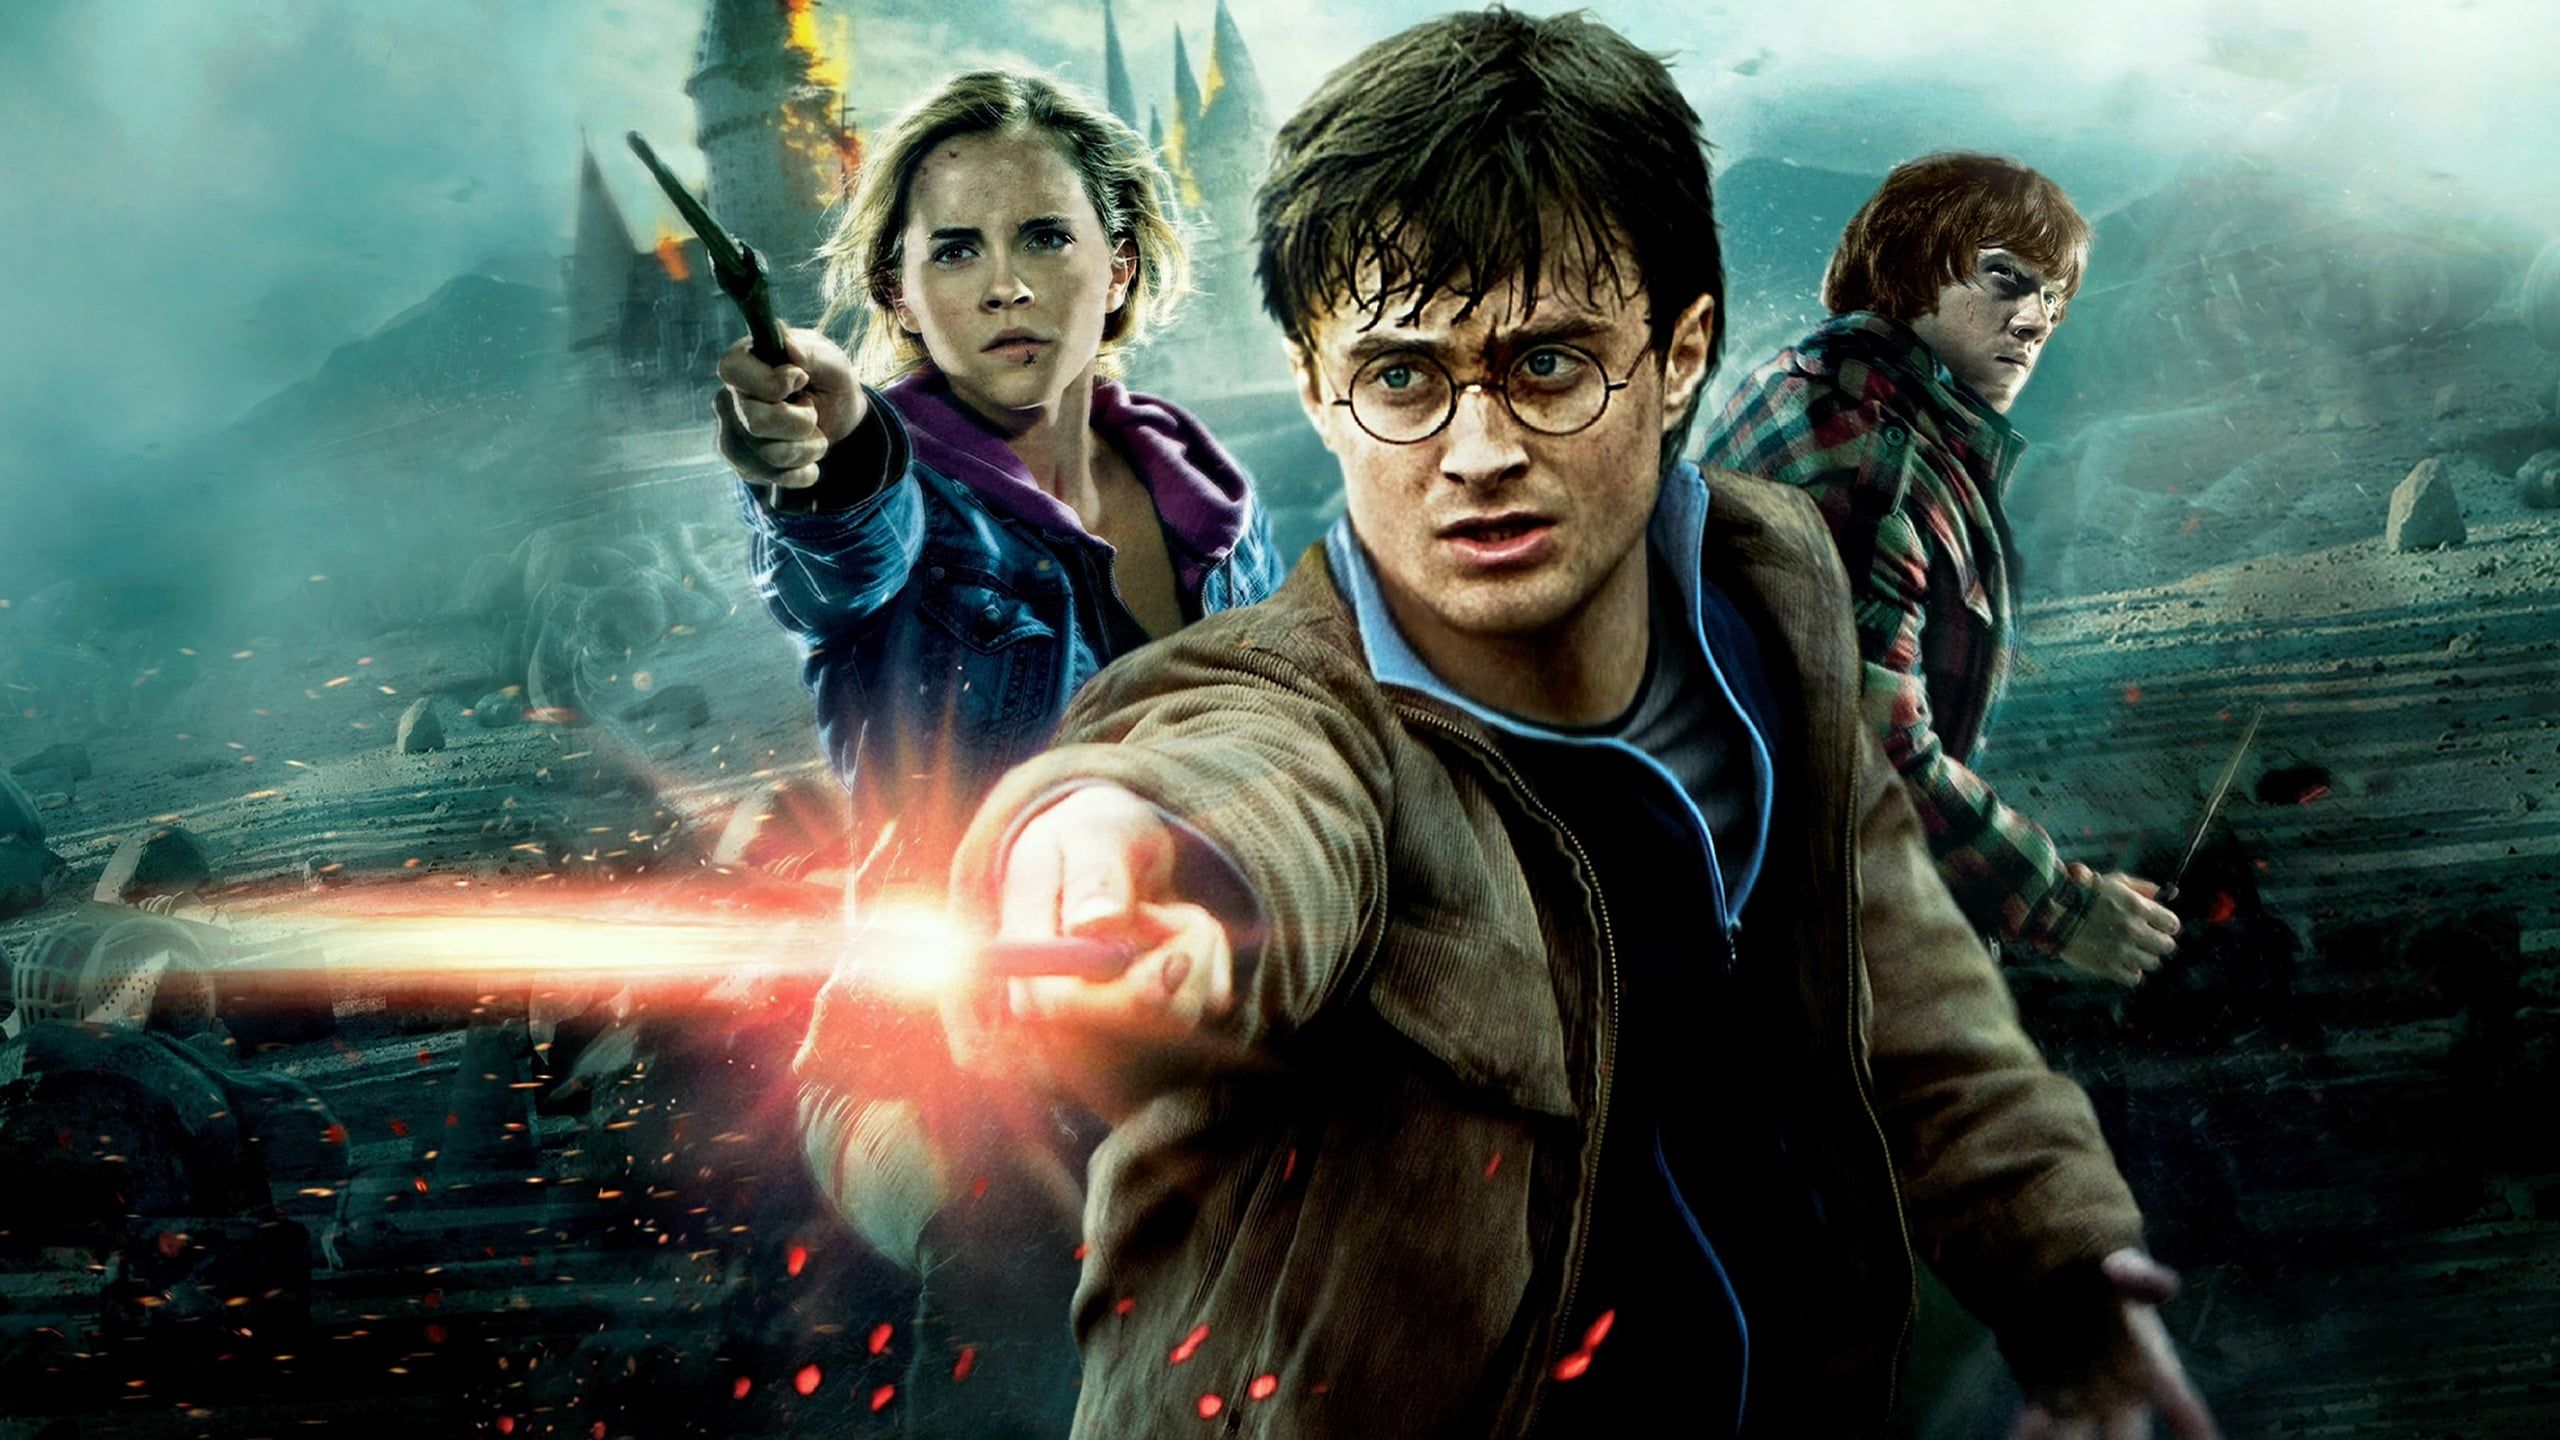 Harry Potter and the Deathly Hallows: Part 2 - Box Office